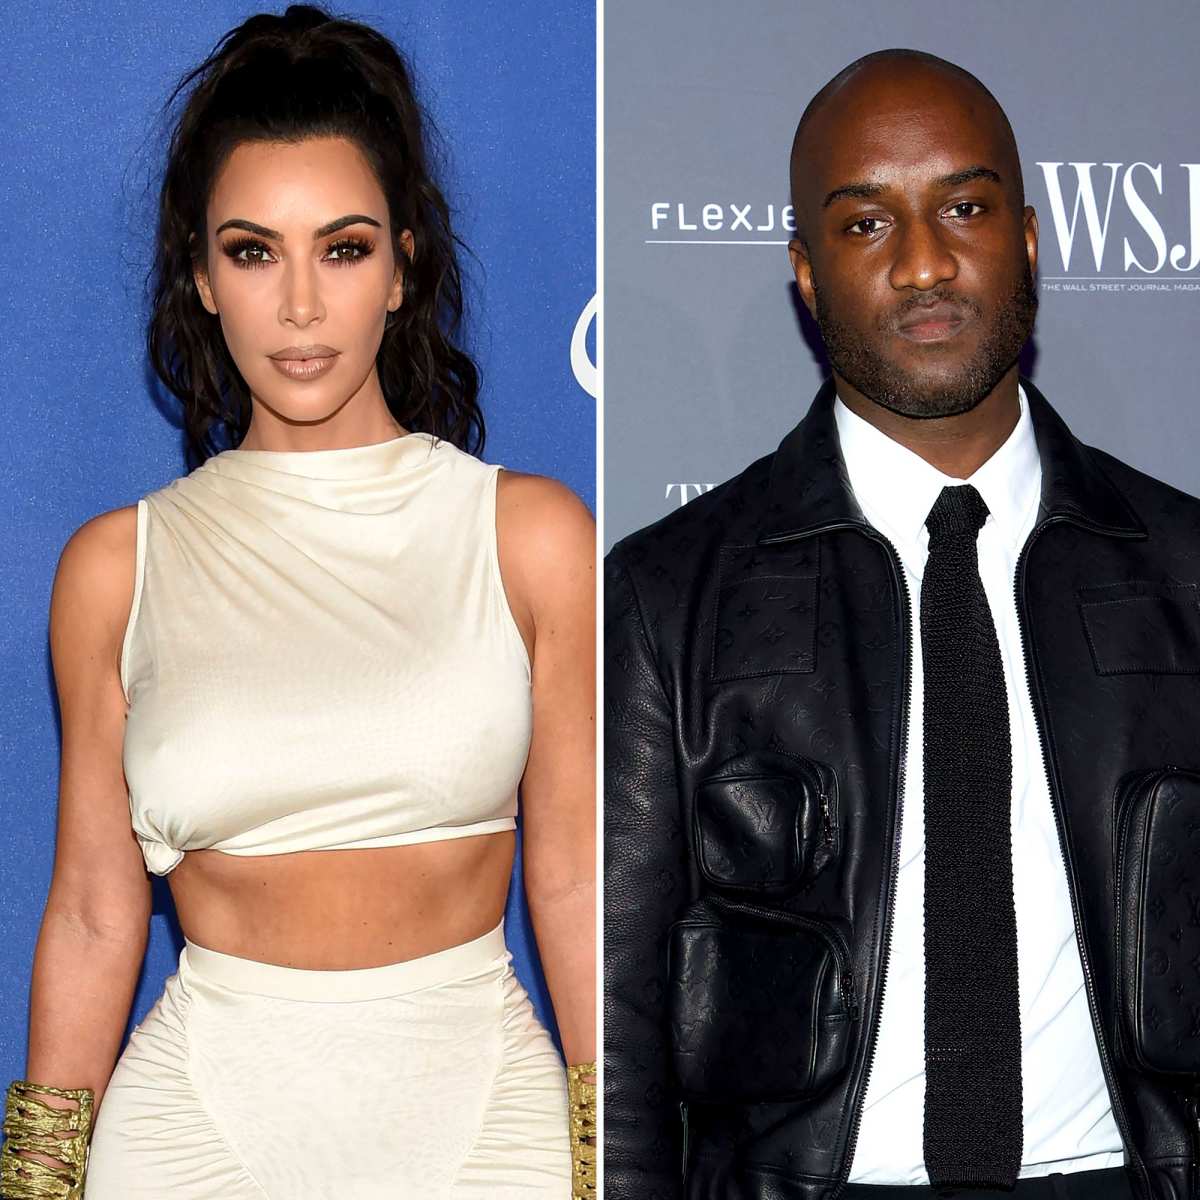 Kim Kardashian Shares Photos with North West from Virgil Abloh's